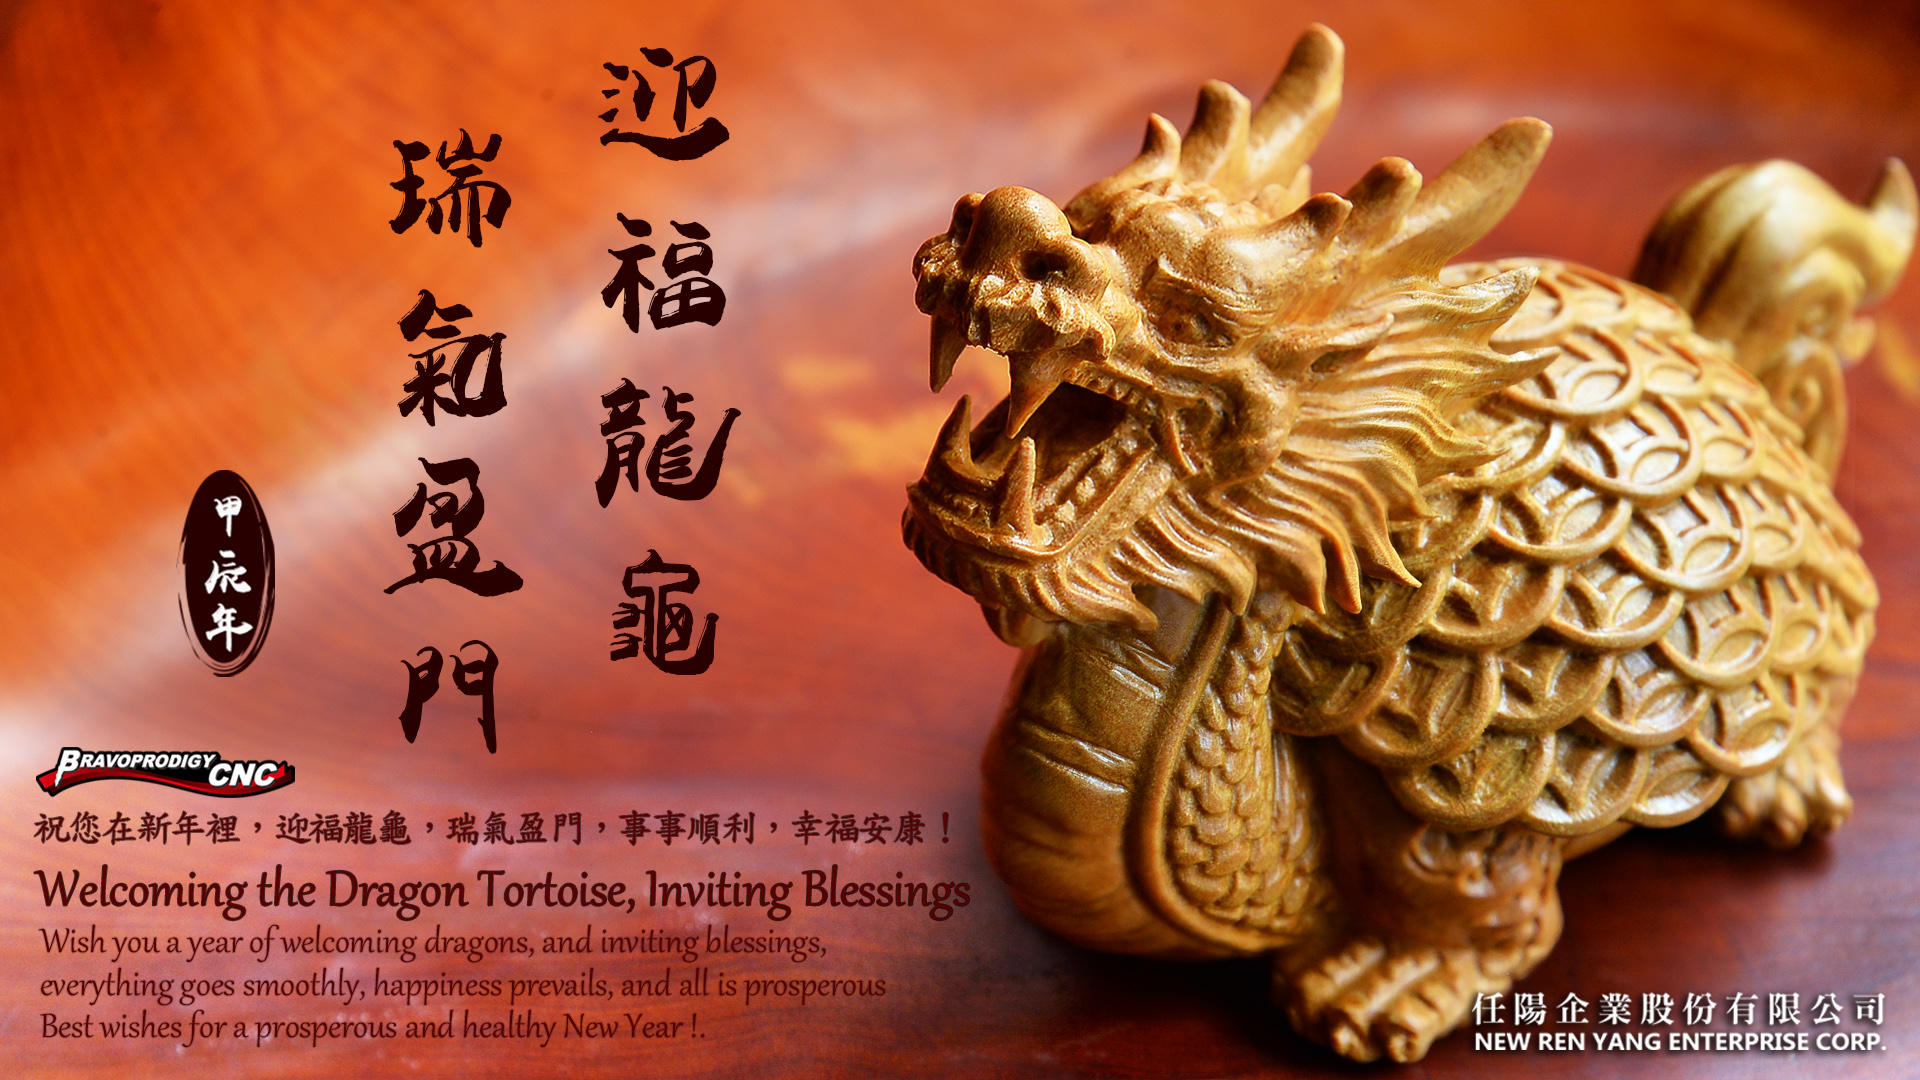 Welcoming the Dragon Tortoise, Inviting Blessings – A Lunar New Year Greeting from BRAVOPRODIGY CNC 